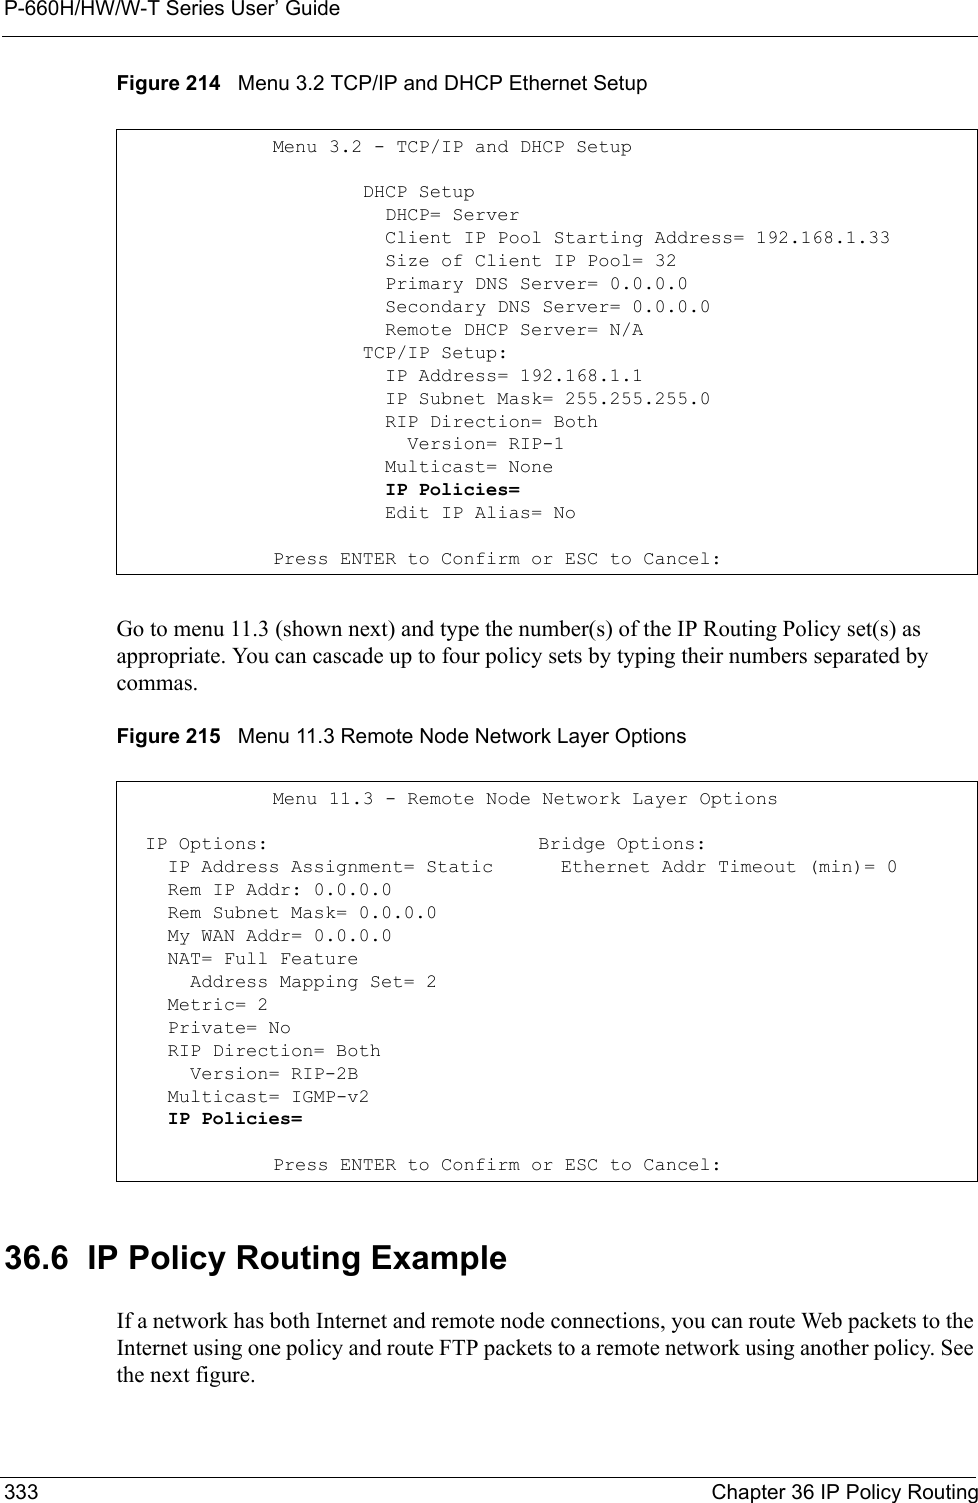 P-660H/HW/W-T Series User’ Guide333 Chapter 36 IP Policy RoutingFigure 214   Menu 3.2 TCP/IP and DHCP Ethernet SetupGo to menu 11.3 (shown next) and type the number(s) of the IP Routing Policy set(s) as appropriate. You can cascade up to four policy sets by typing their numbers separated by commas.Figure 215   Menu 11.3 Remote Node Network Layer Options36.6  IP Policy Routing ExampleIf a network has both Internet and remote node connections, you can route Web packets to the Internet using one policy and route FTP packets to a remote network using another policy. See the next figure. Menu 3.2 - TCP/IP and DHCP Setup        DHCP Setup          DHCP= Server          Client IP Pool Starting Address= 192.168.1.33          Size of Client IP Pool= 32          Primary DNS Server= 0.0.0.0          Secondary DNS Server= 0.0.0.0          Remote DHCP Server= N/A        TCP/IP Setup:          IP Address= 192.168.1.1          IP Subnet Mask= 255.255.255.0          RIP Direction= Both            Version= RIP-1          Multicast= None          IP Policies=          Edit IP Alias= NoPress ENTER to Confirm or ESC to Cancel:Menu 11.3 - Remote Node Network Layer Options  IP Options:                        Bridge Options:    IP Address Assignment= Static      Ethernet Addr Timeout (min)= 0    Rem IP Addr: 0.0.0.0                  Rem Subnet Mask= 0.0.0.0      My WAN Addr= 0.0.0.0                 NAT= Full Feature      Address Mapping Set= 2    Metric= 2    Private= No    RIP Direction= Both                   Version= RIP-2B                     Multicast= IGMP-v2    IP Policies= Press ENTER to Confirm or ESC to Cancel: